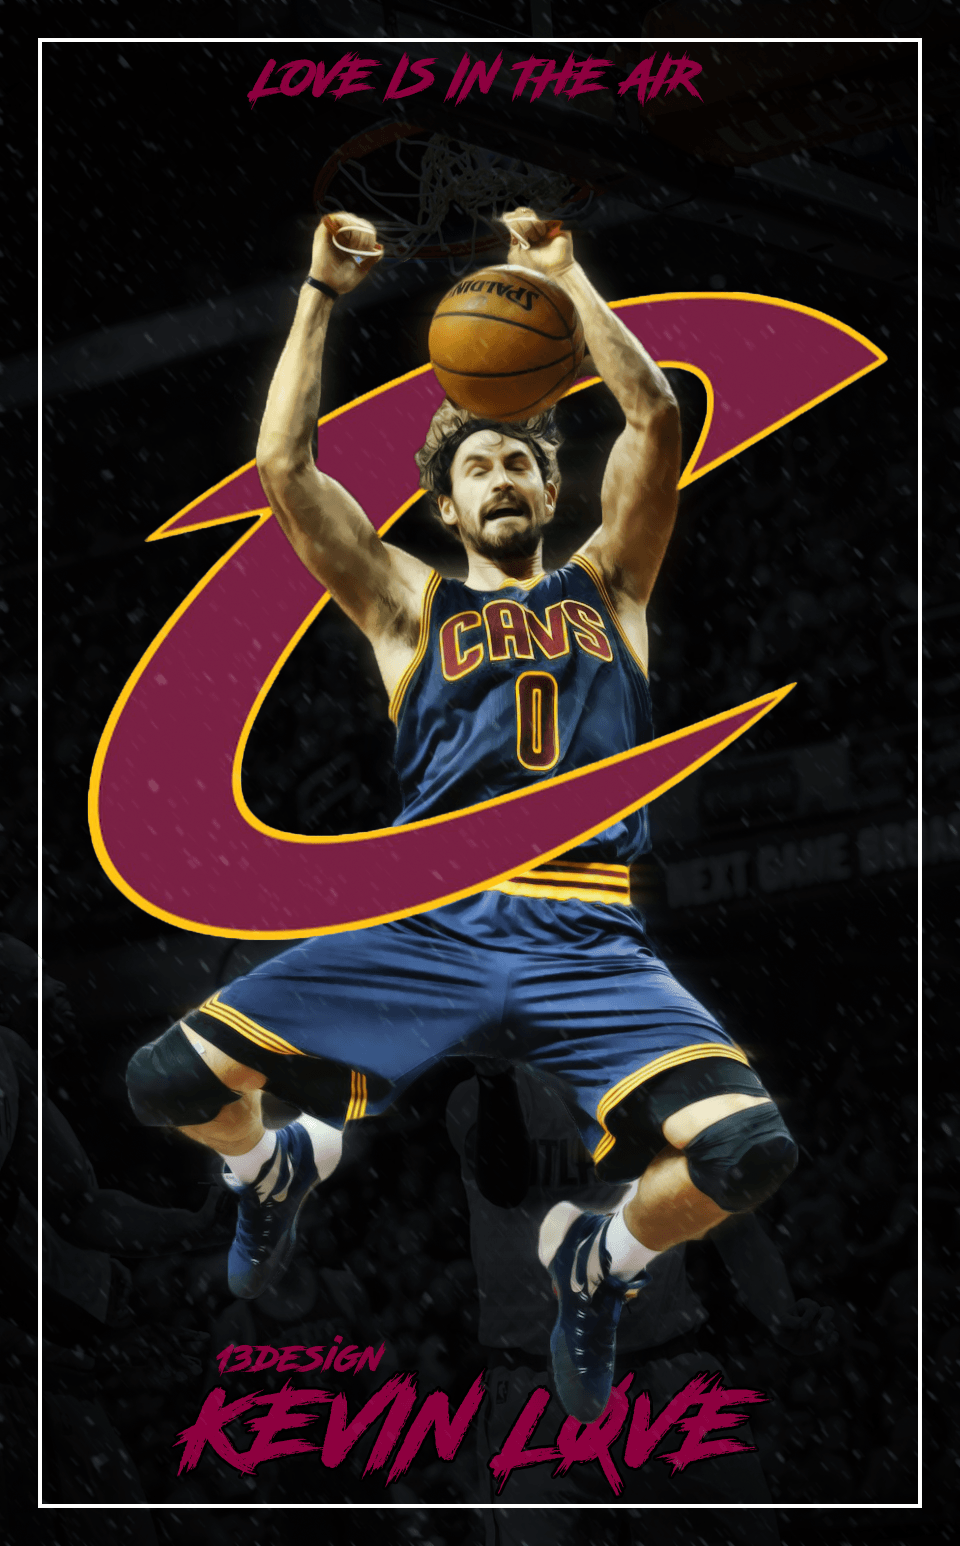 KEVIN LOVE WALLPAPER IS IN THE AIR